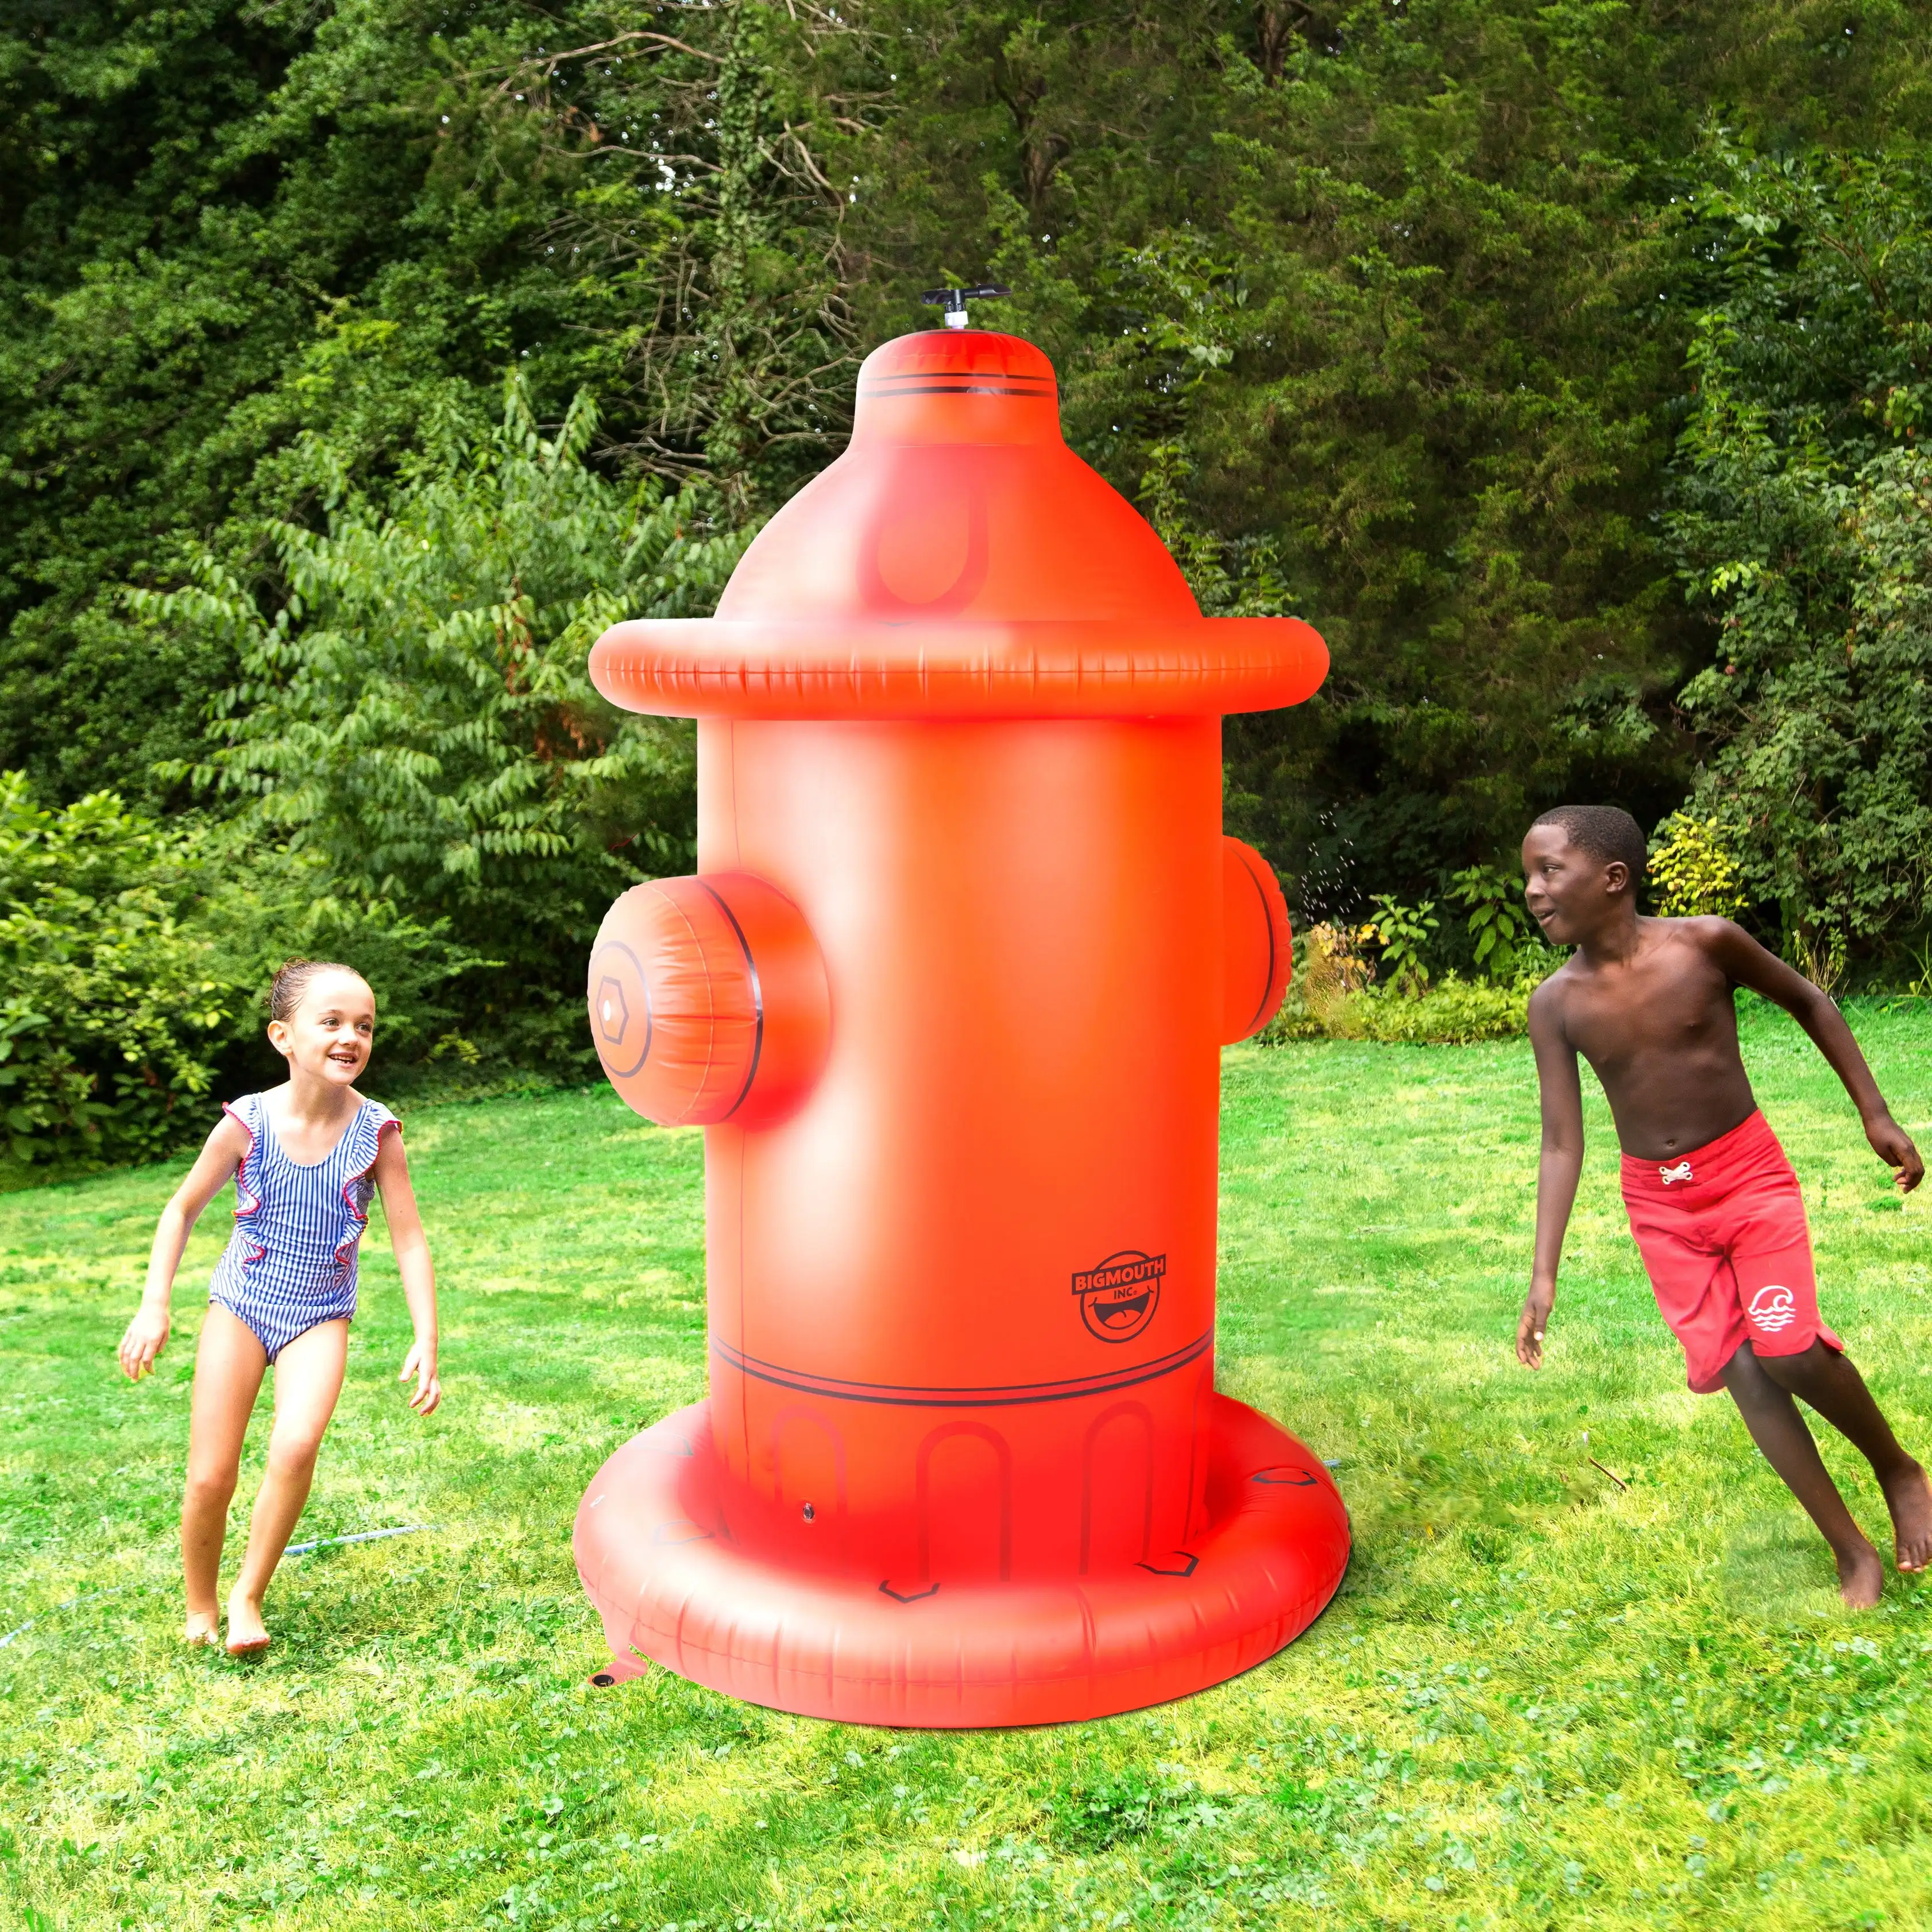 Bigmouth - Ginormous Fire Hydrant Inflatable Yard Sprinkler